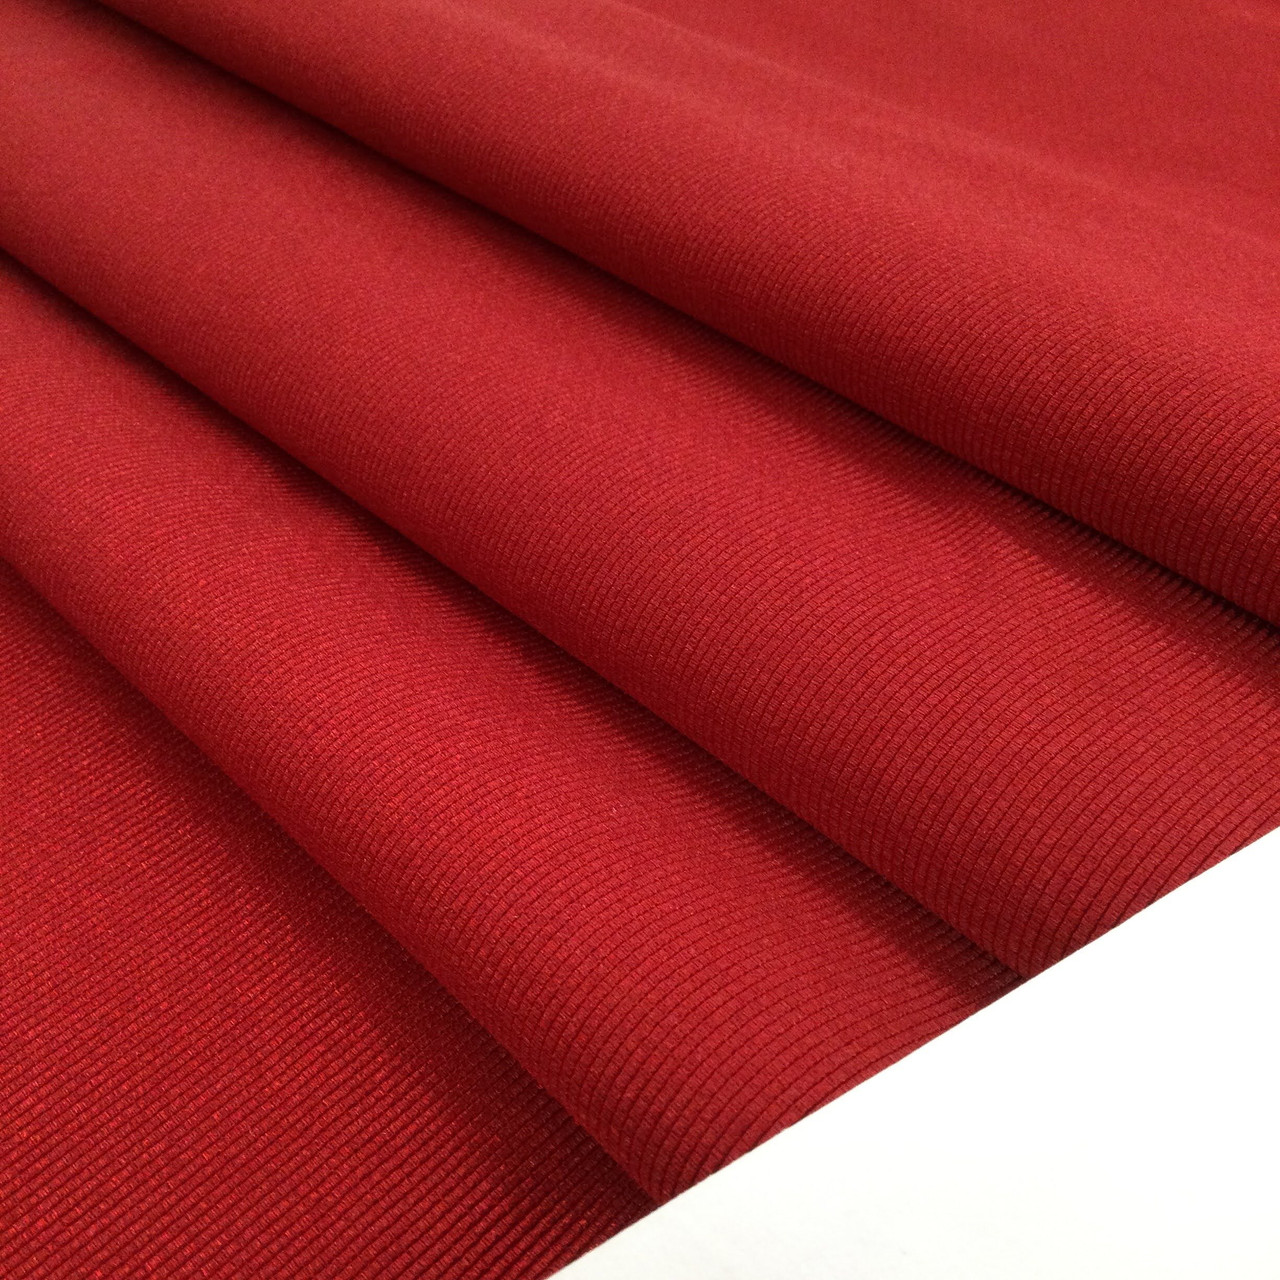 Cherry Red Textured Solid Outdoor Print Upholstery Fabric By The Yard